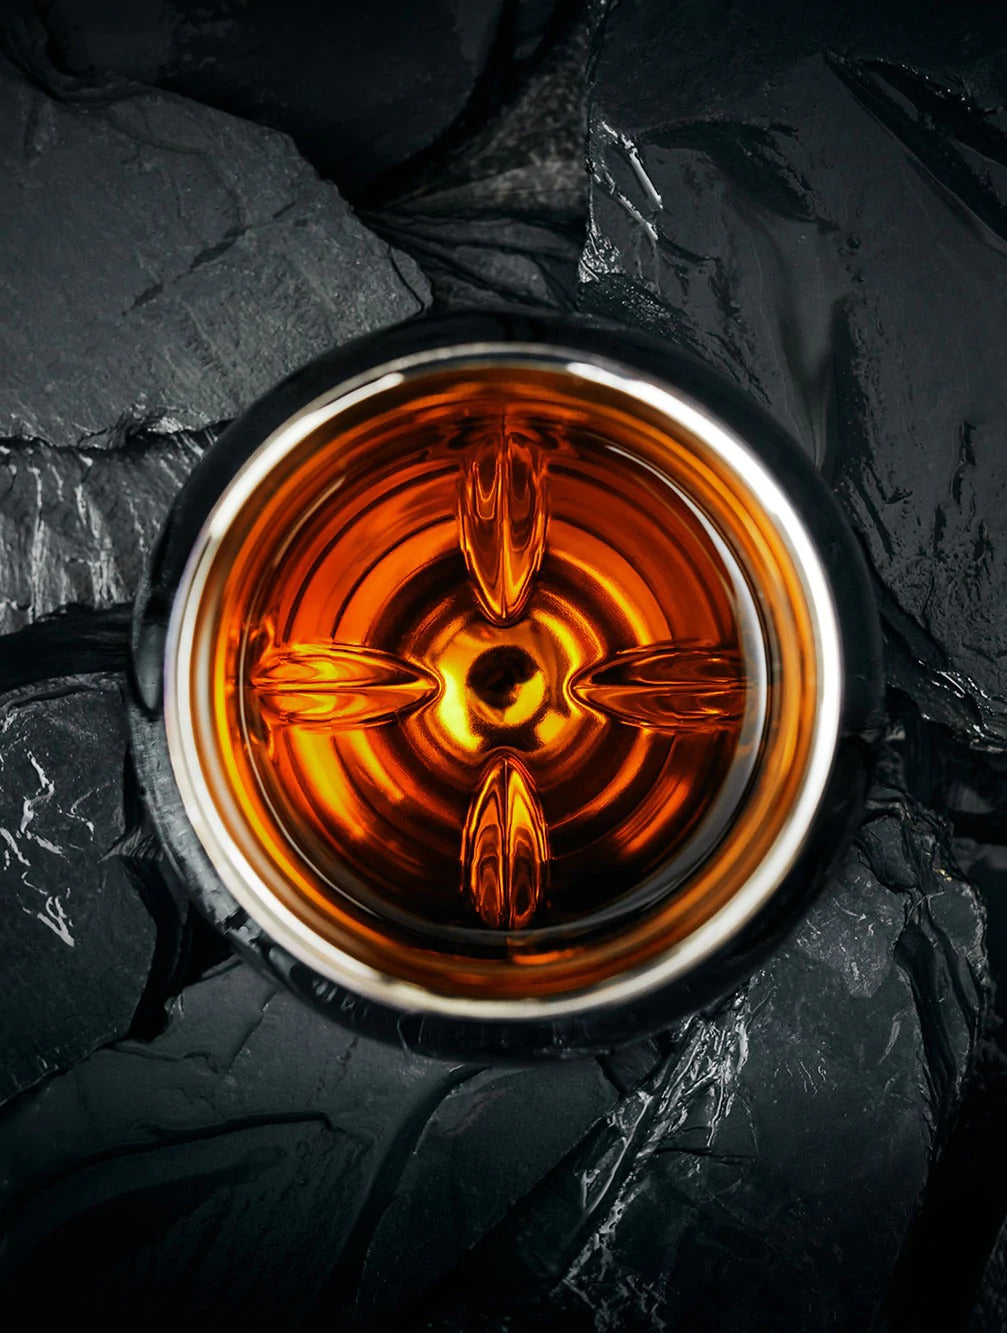 Looking down into the Norlan Steel Tumbler with a burnt orange whiskey inside.